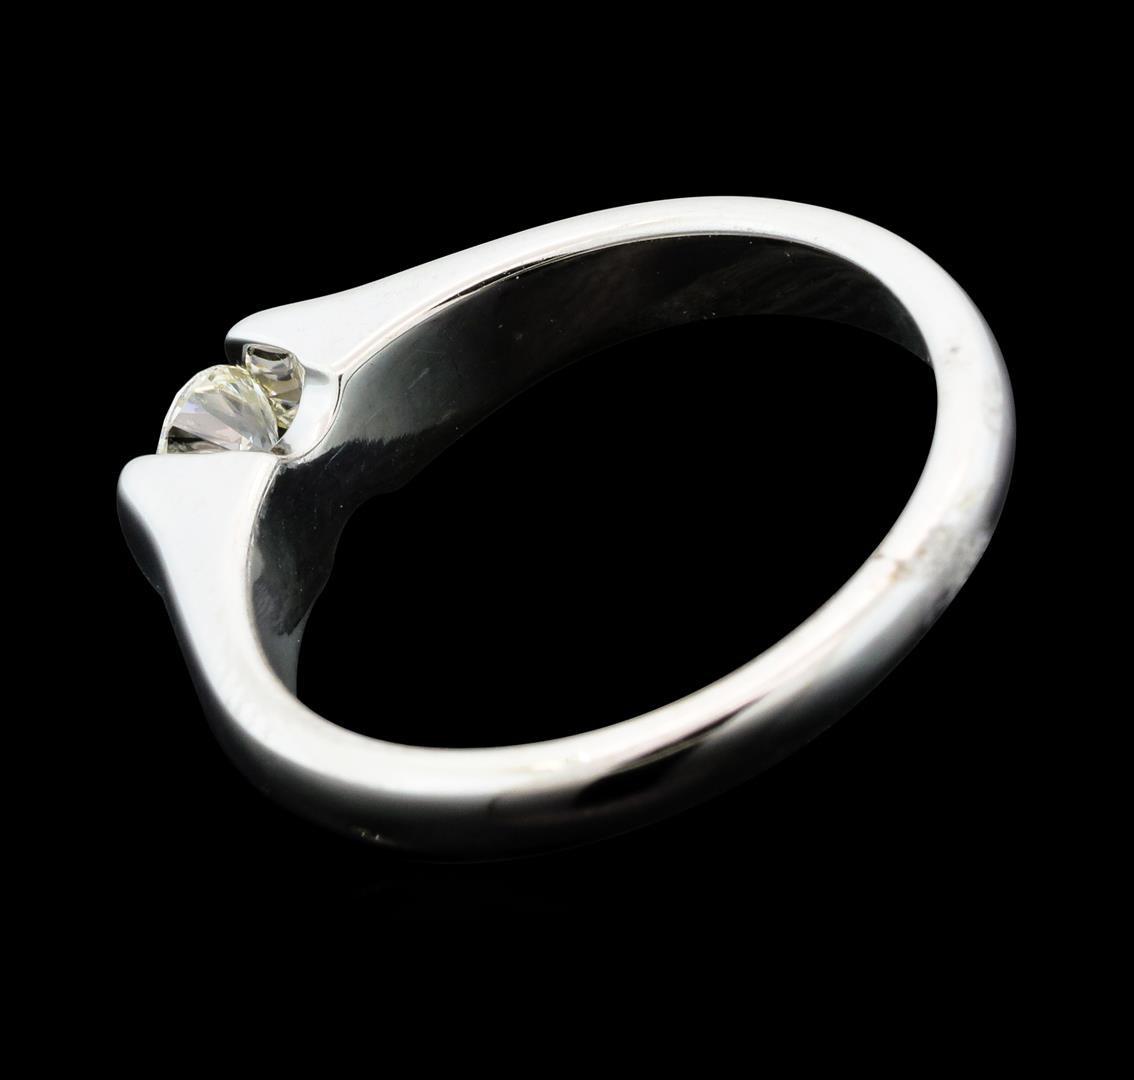 0.30 ctw Diamond Solitaire Ring - 14KT White Gold